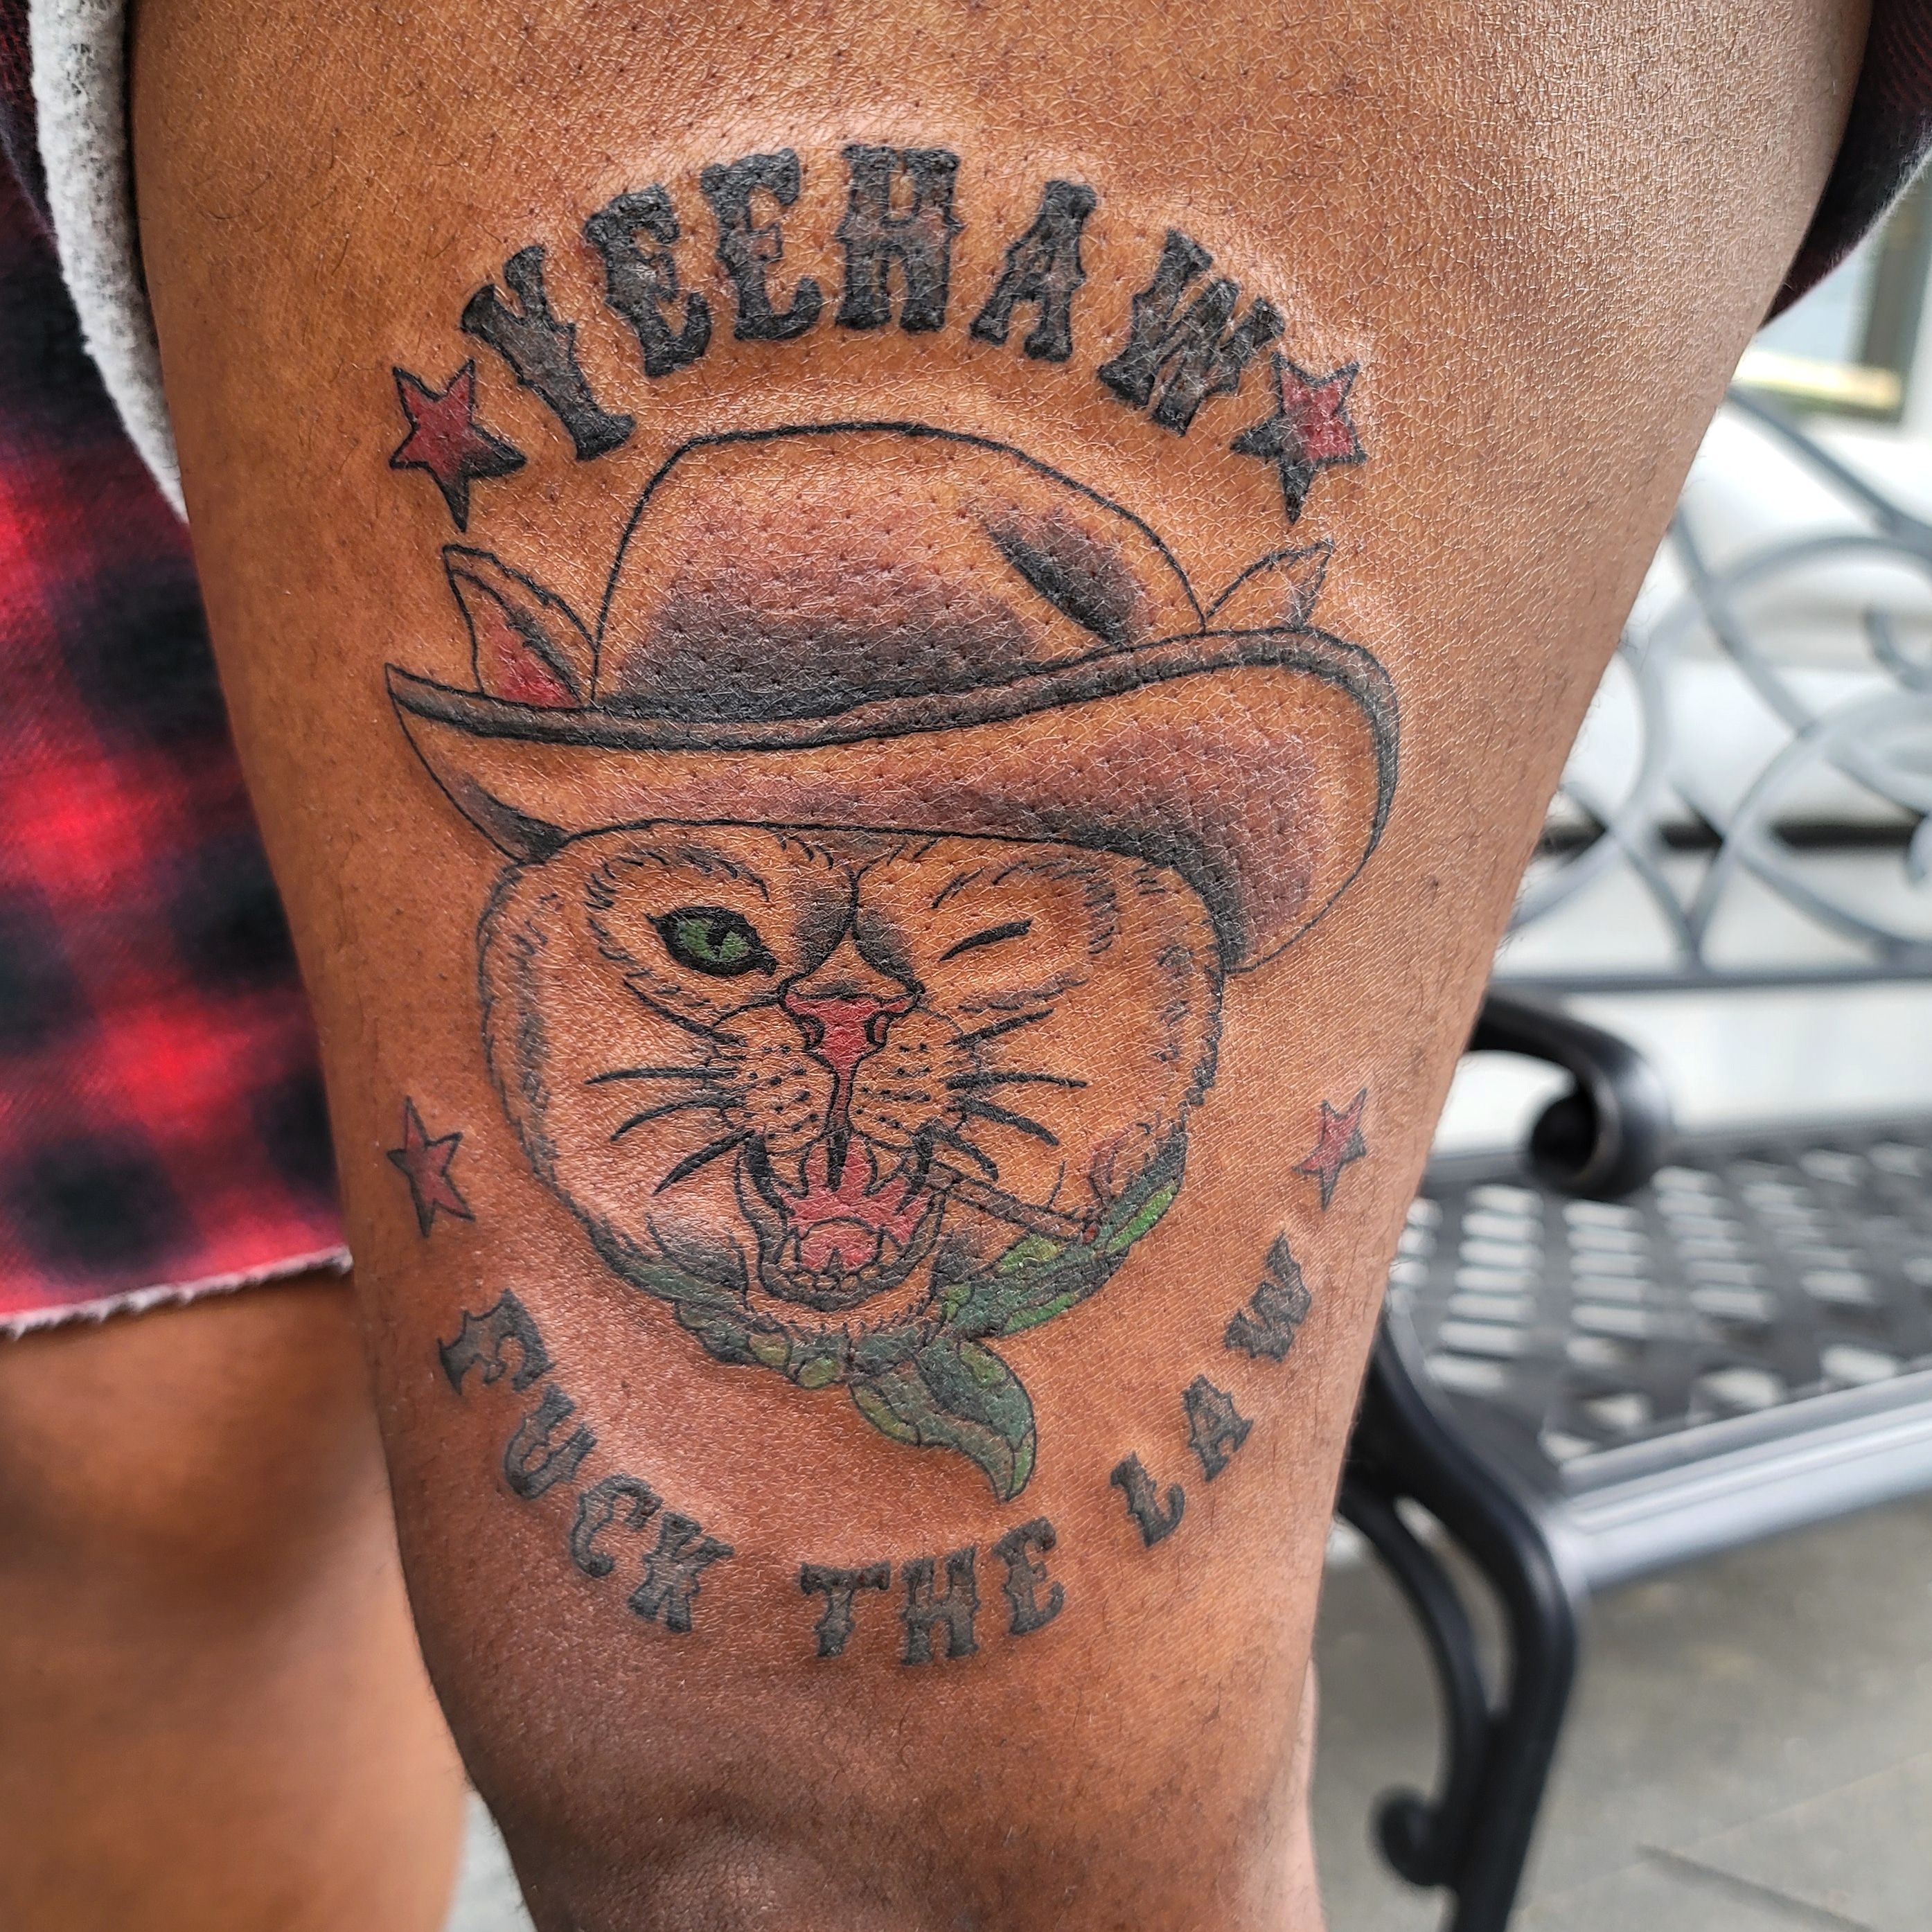 Cowboy kitty for my budding neotrad sleeve by the ever fabulous Jack Goks  at Cloak and Dagger London UK  rtattoos